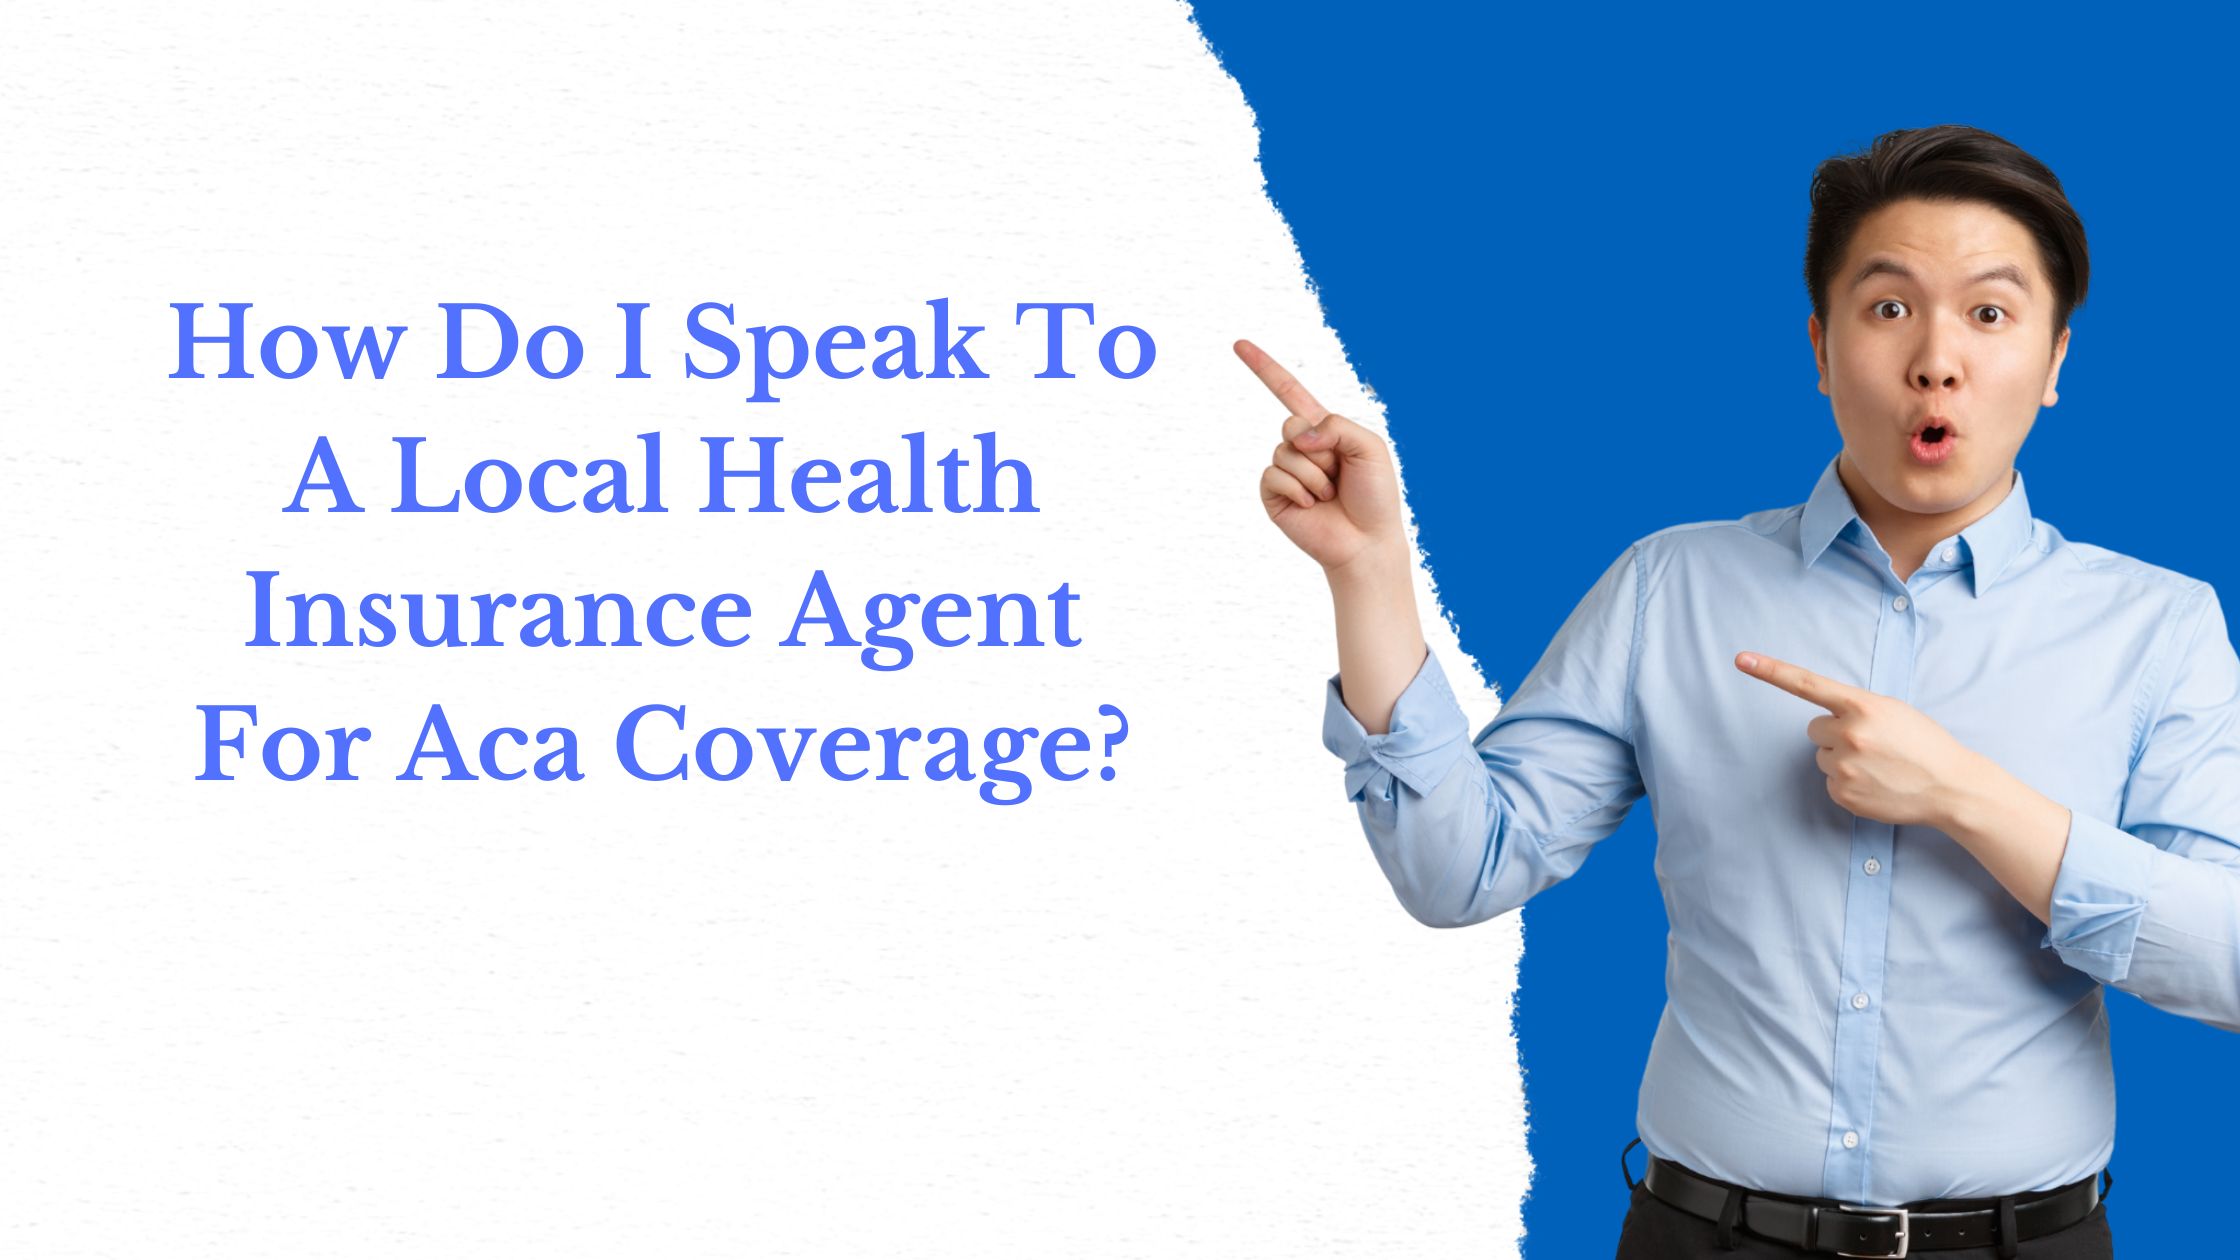 How Do I Speak To A Local Health Insurance Agent For Aca Coverage